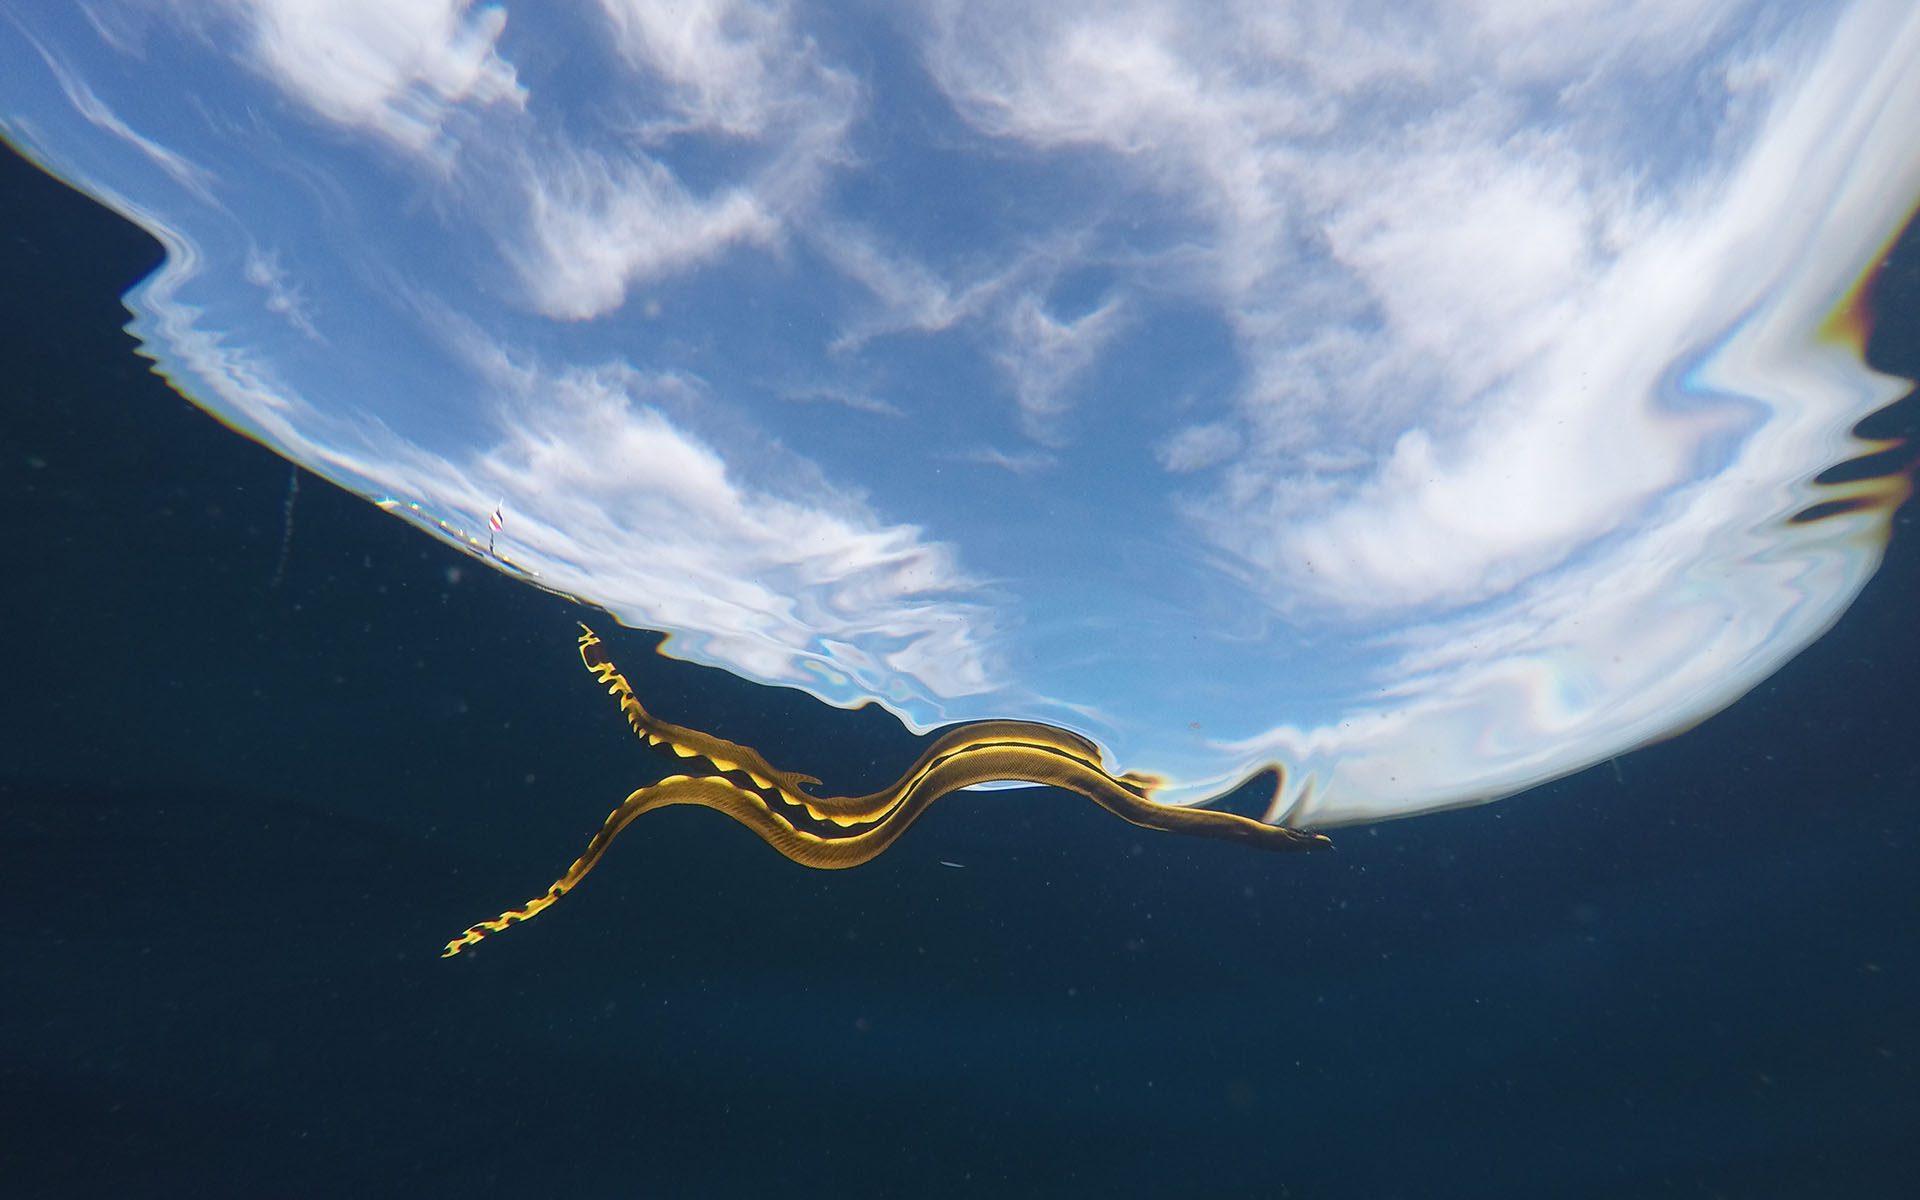 The yellow-bellied sea snake is the only pelagic species in the order Squamata (snakes and lizards).